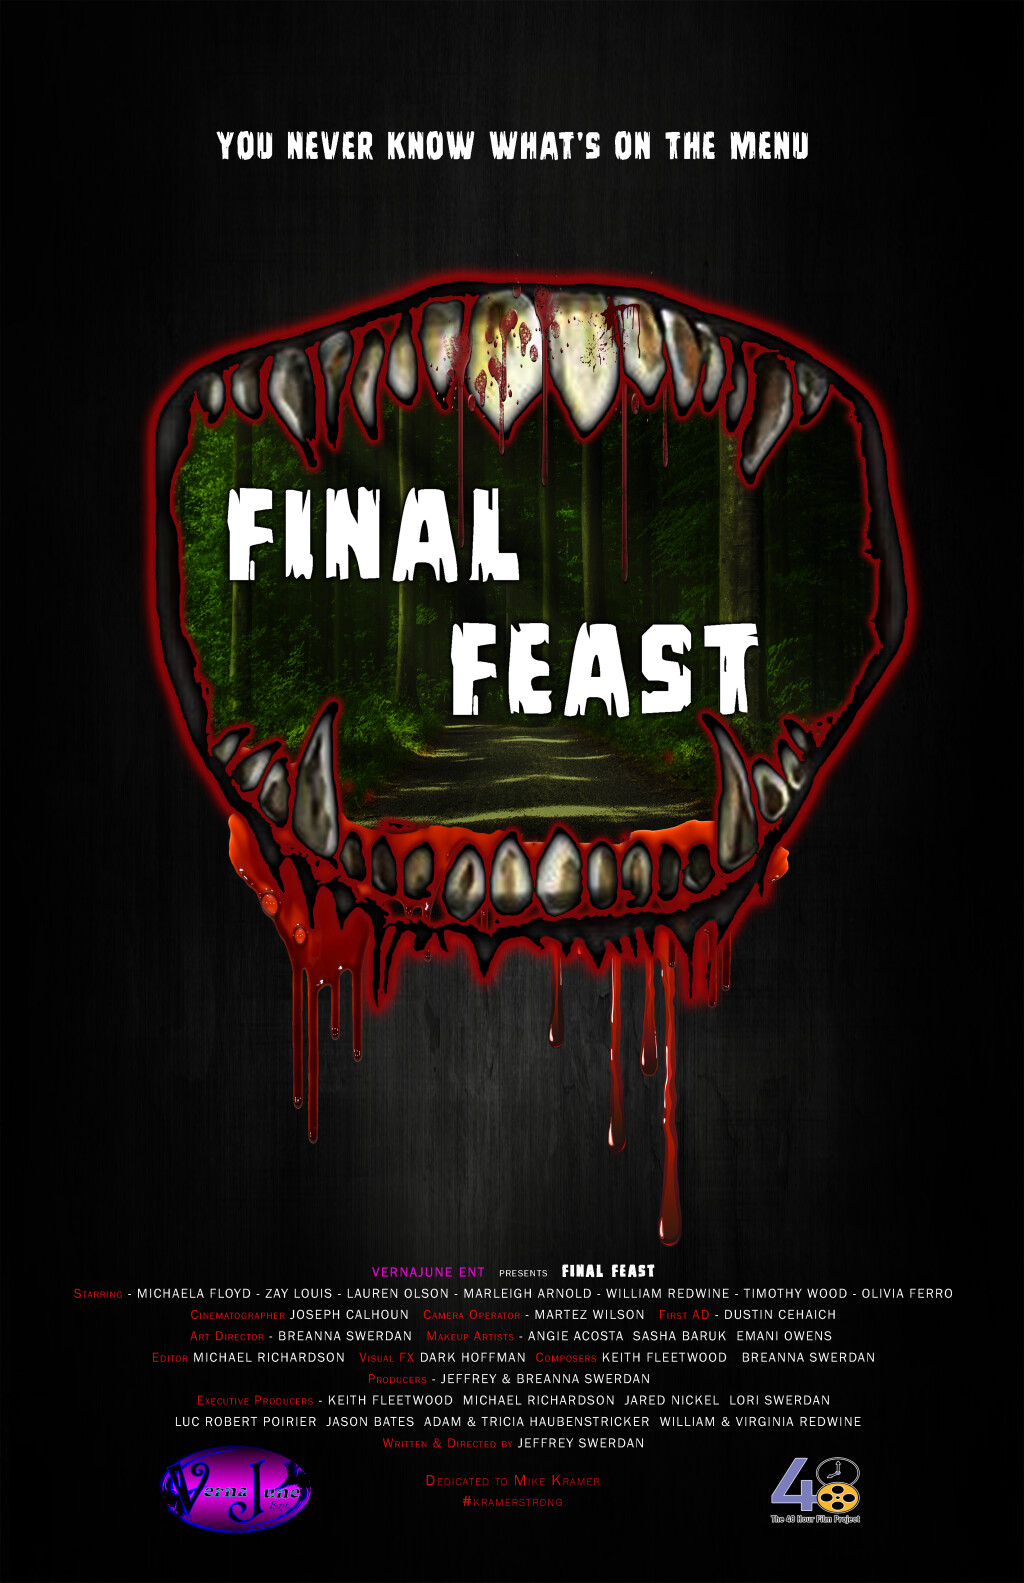 Filmposter for Final Feast